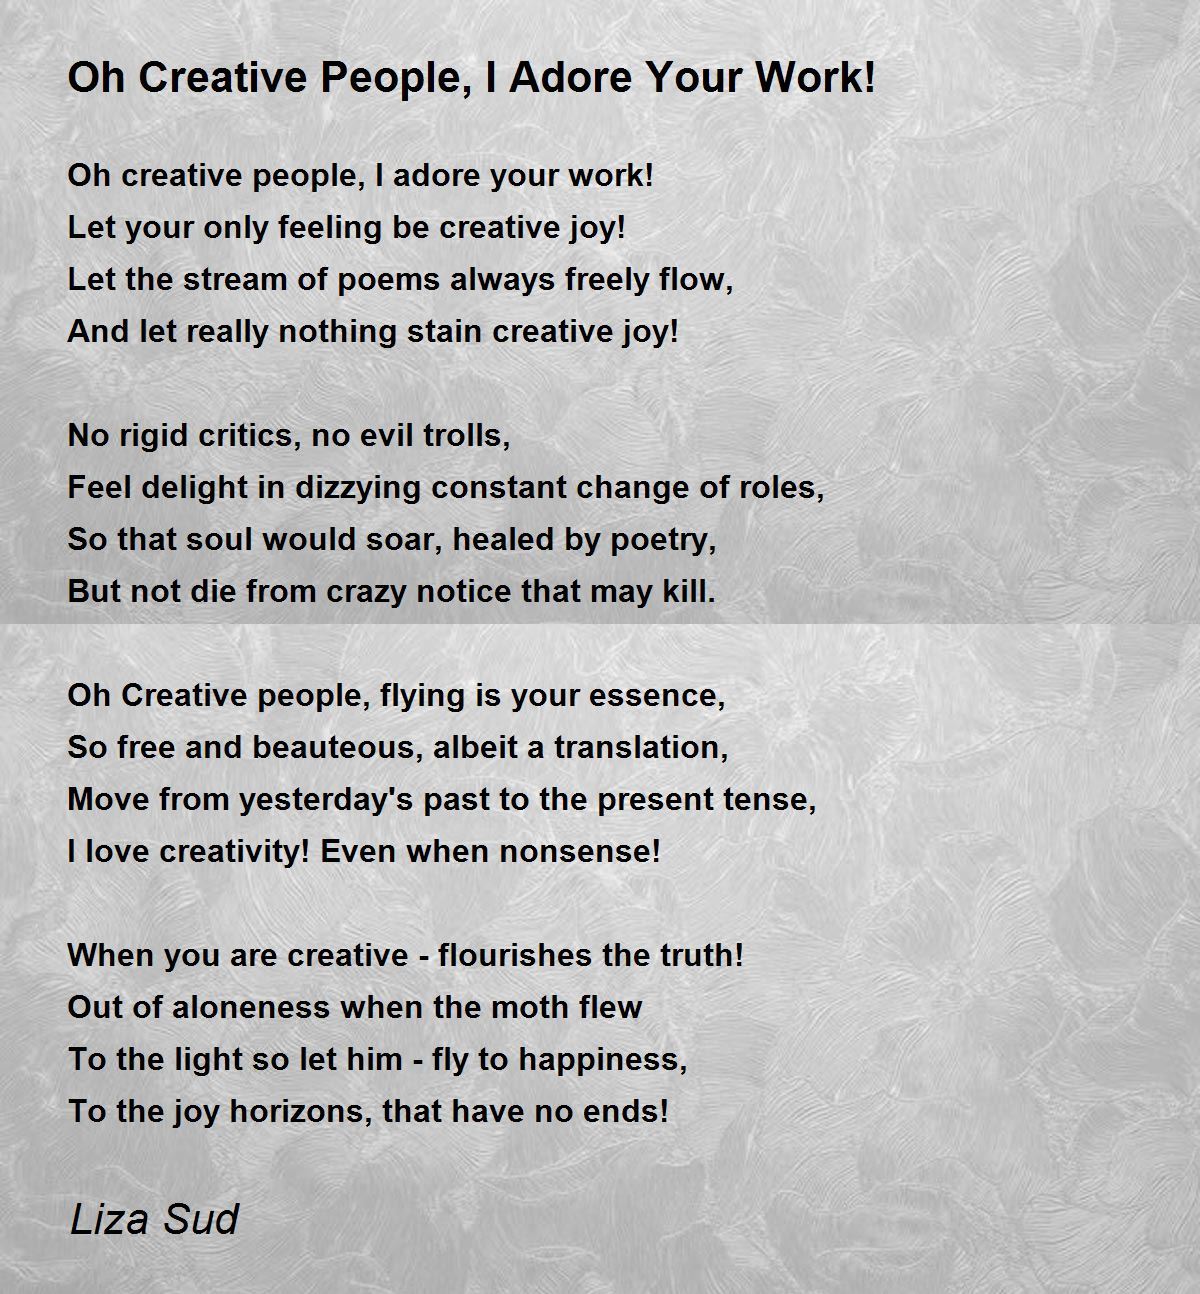 Oh Creative People, I Adore Your Work! - Oh Creative People, I Adore Your  Work! Poem by Liza Sud